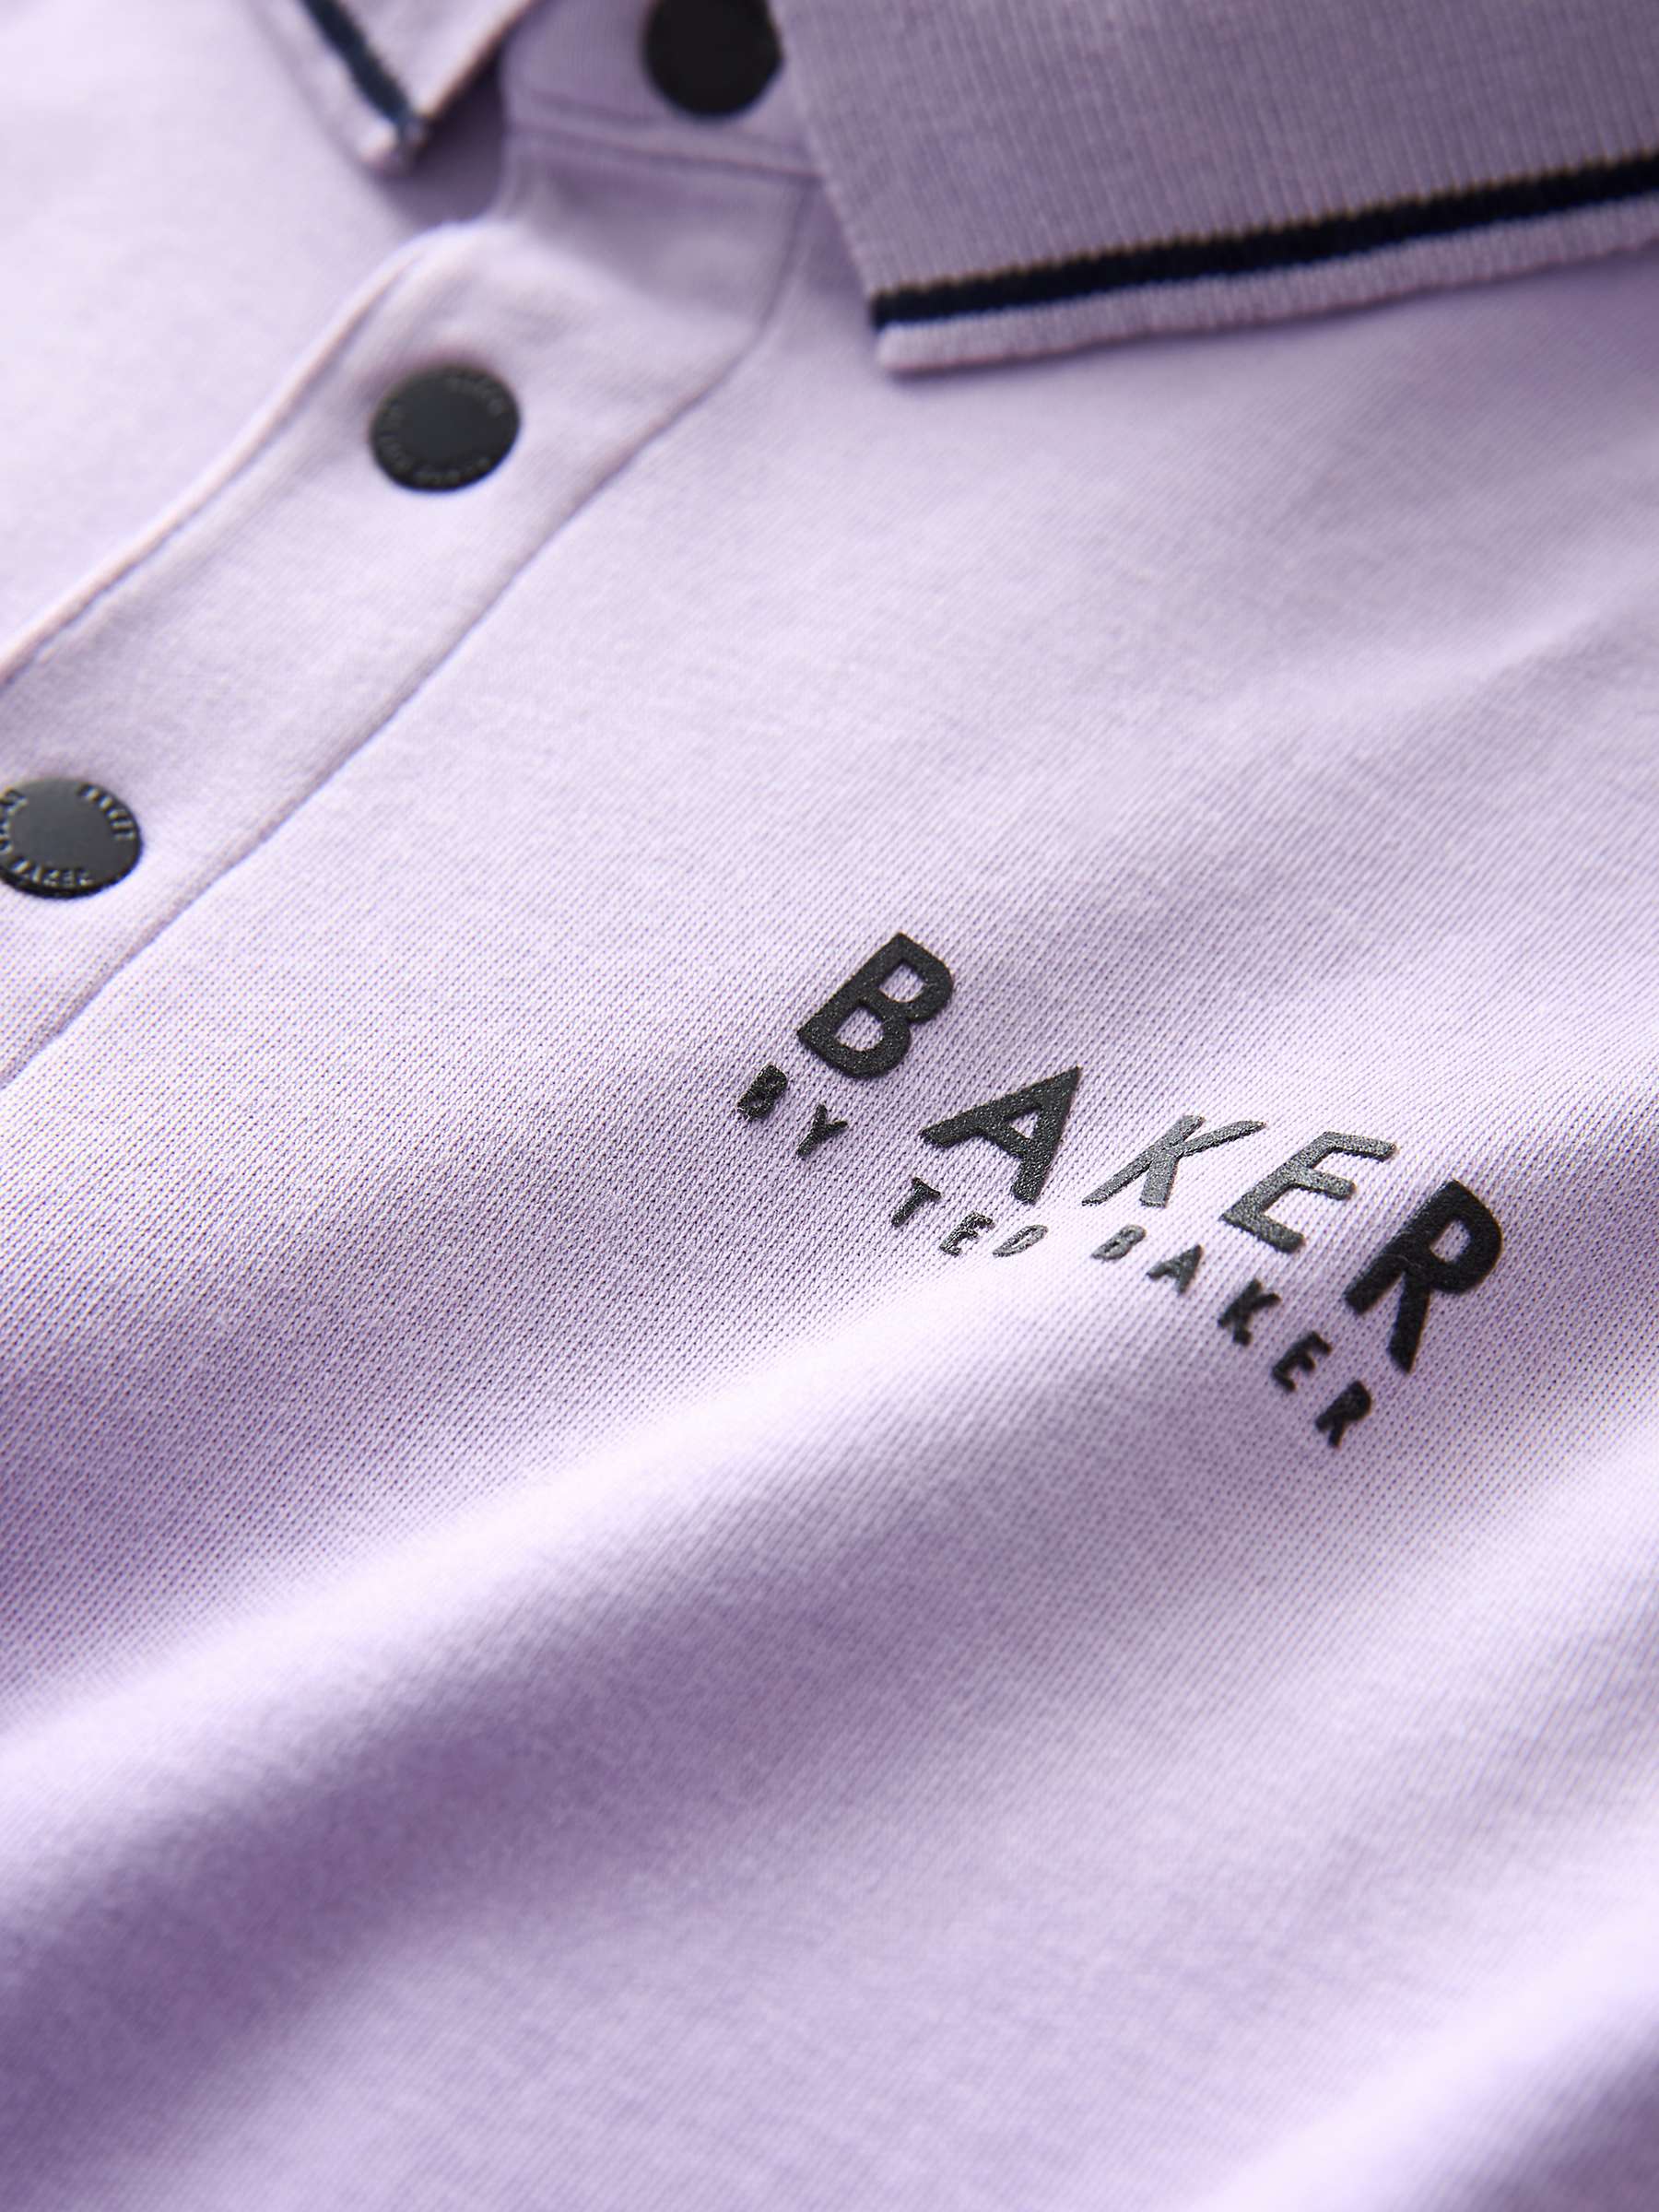 Buy Ted Baker Kids' Logo Ombre Polo Shirt, Lilac Online at johnlewis.com